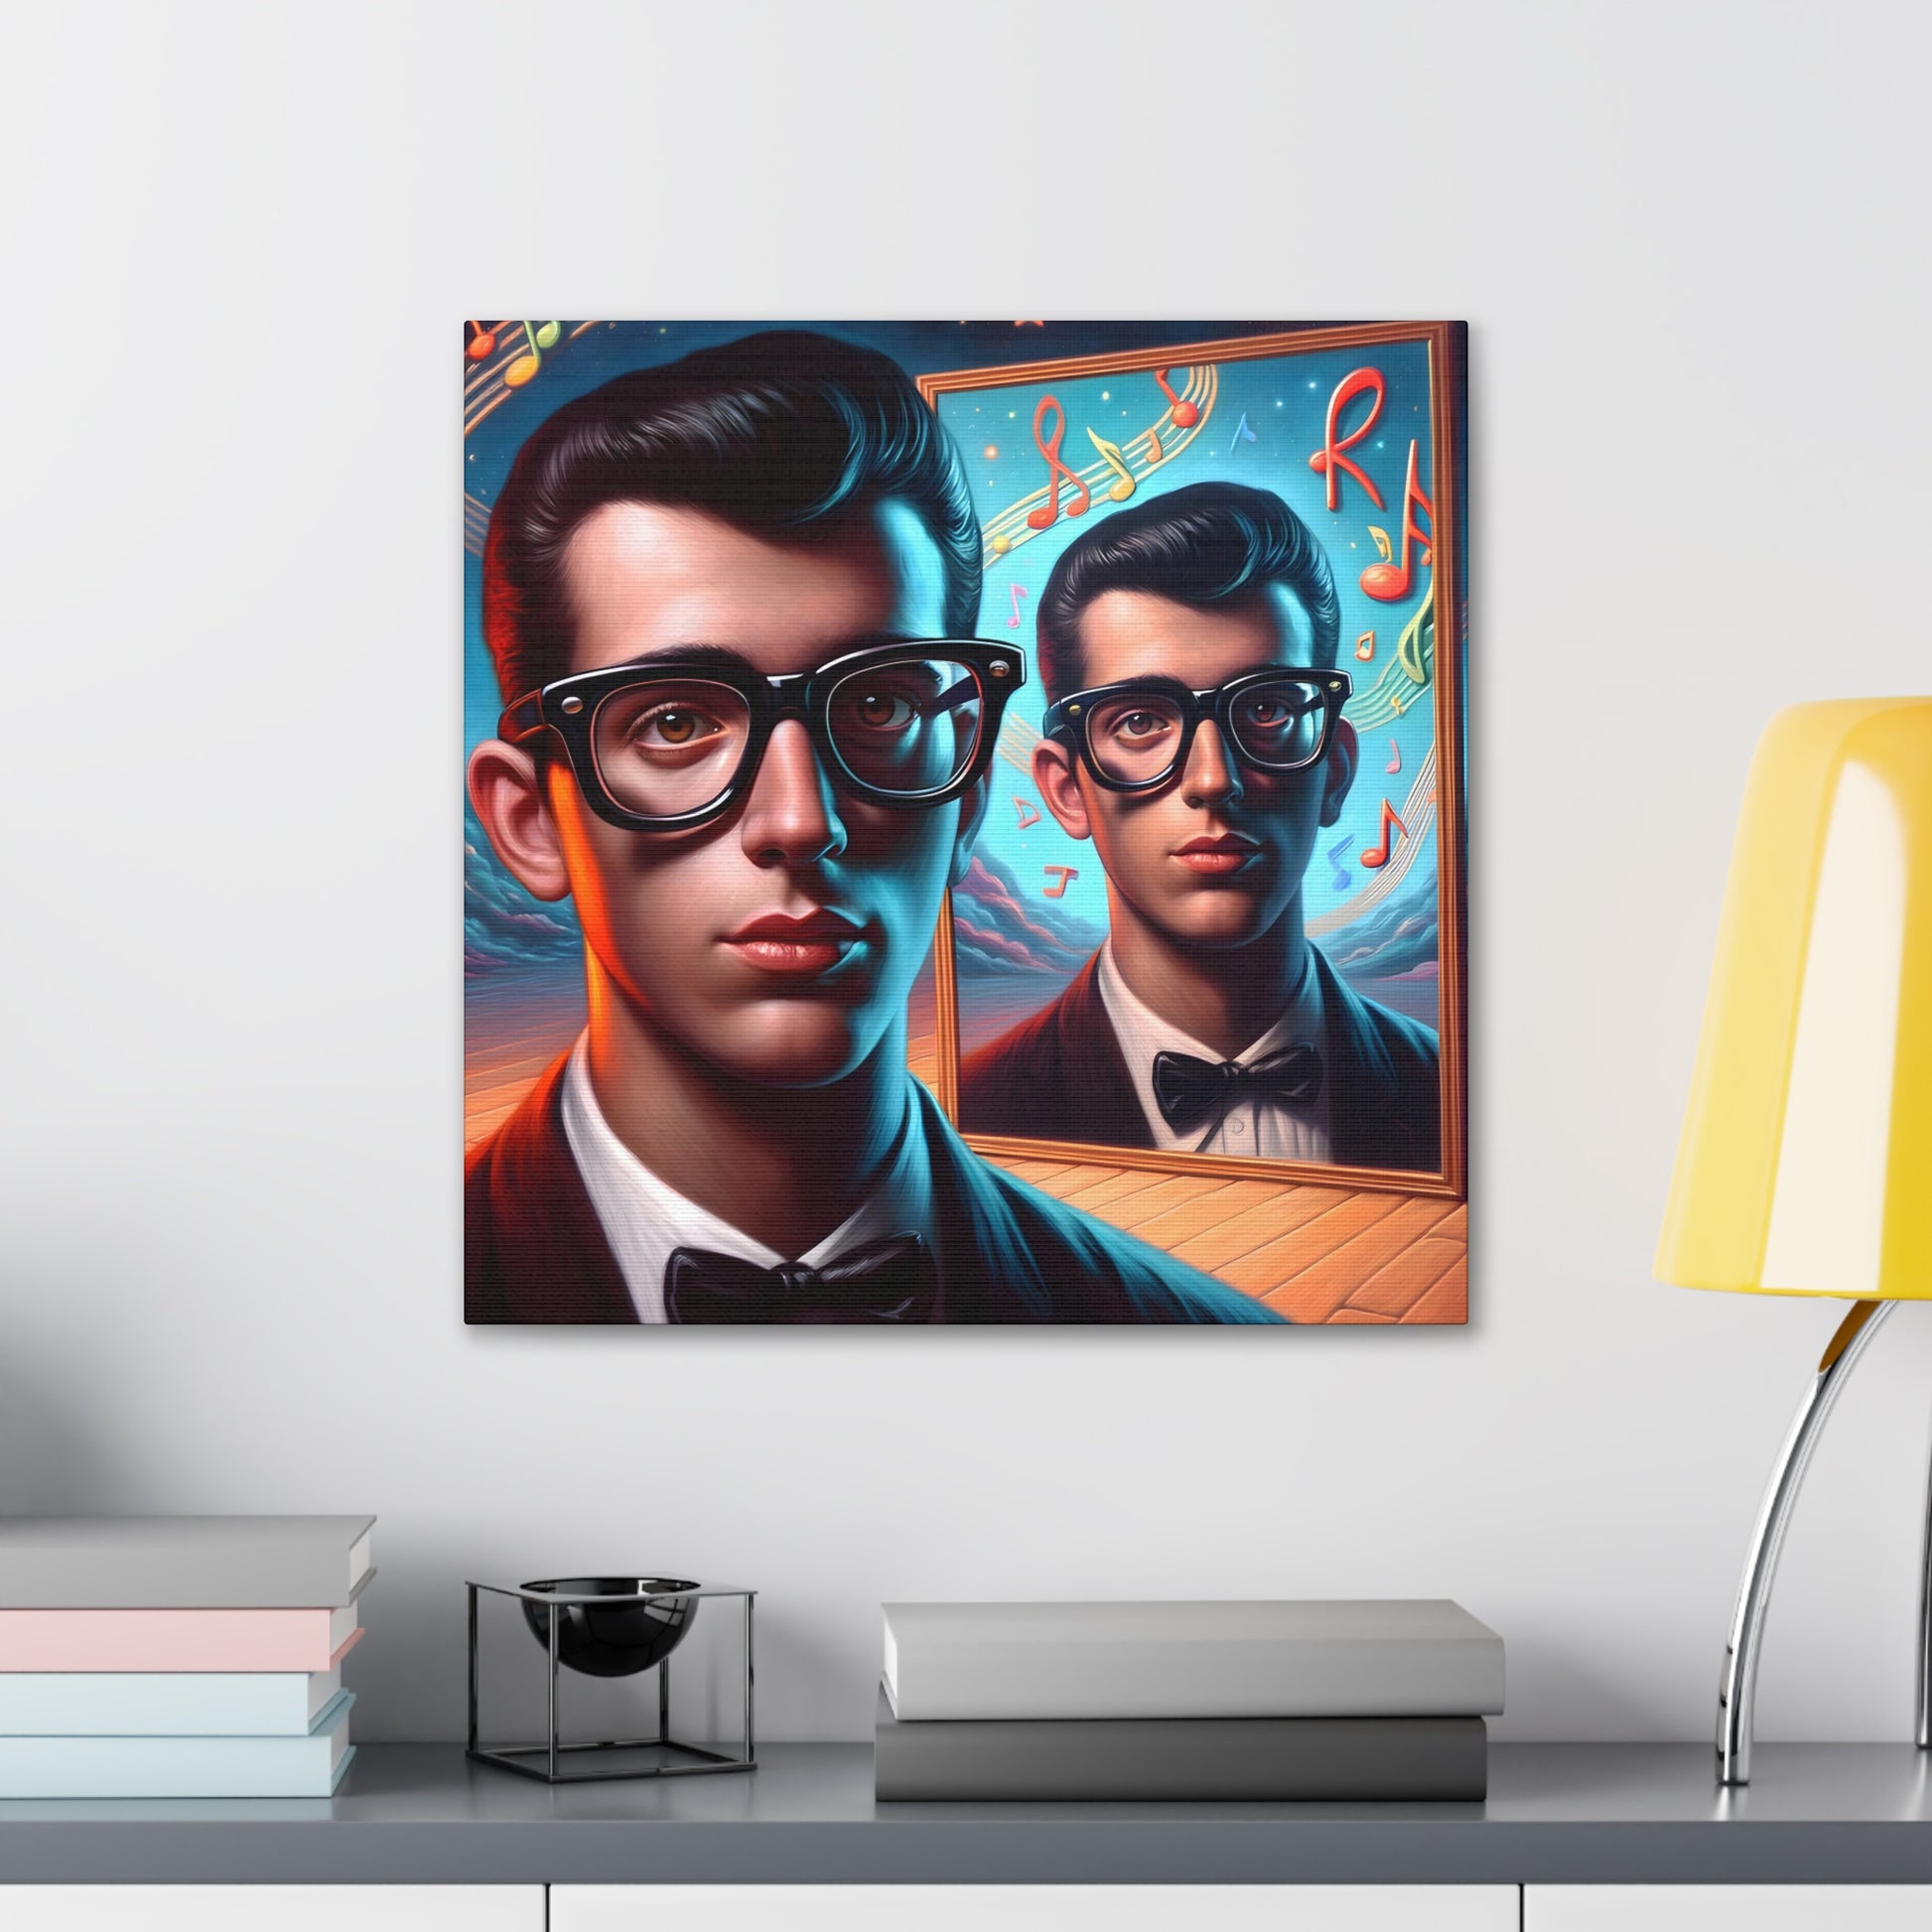 in situ Vibrant retro-inspired artwork capturing the essence of the 1950s rock and roll era. Features a cool vintage figure with slick hair and thick-rimmed glasses, gazing into a mirror that reflects a dreamy, music-filled cosmos with musical notes and celestial bodies. Warm color palette with twilight blues, depicting an intimate yet imaginative scene reminiscent of vinyl and jukeboxes.